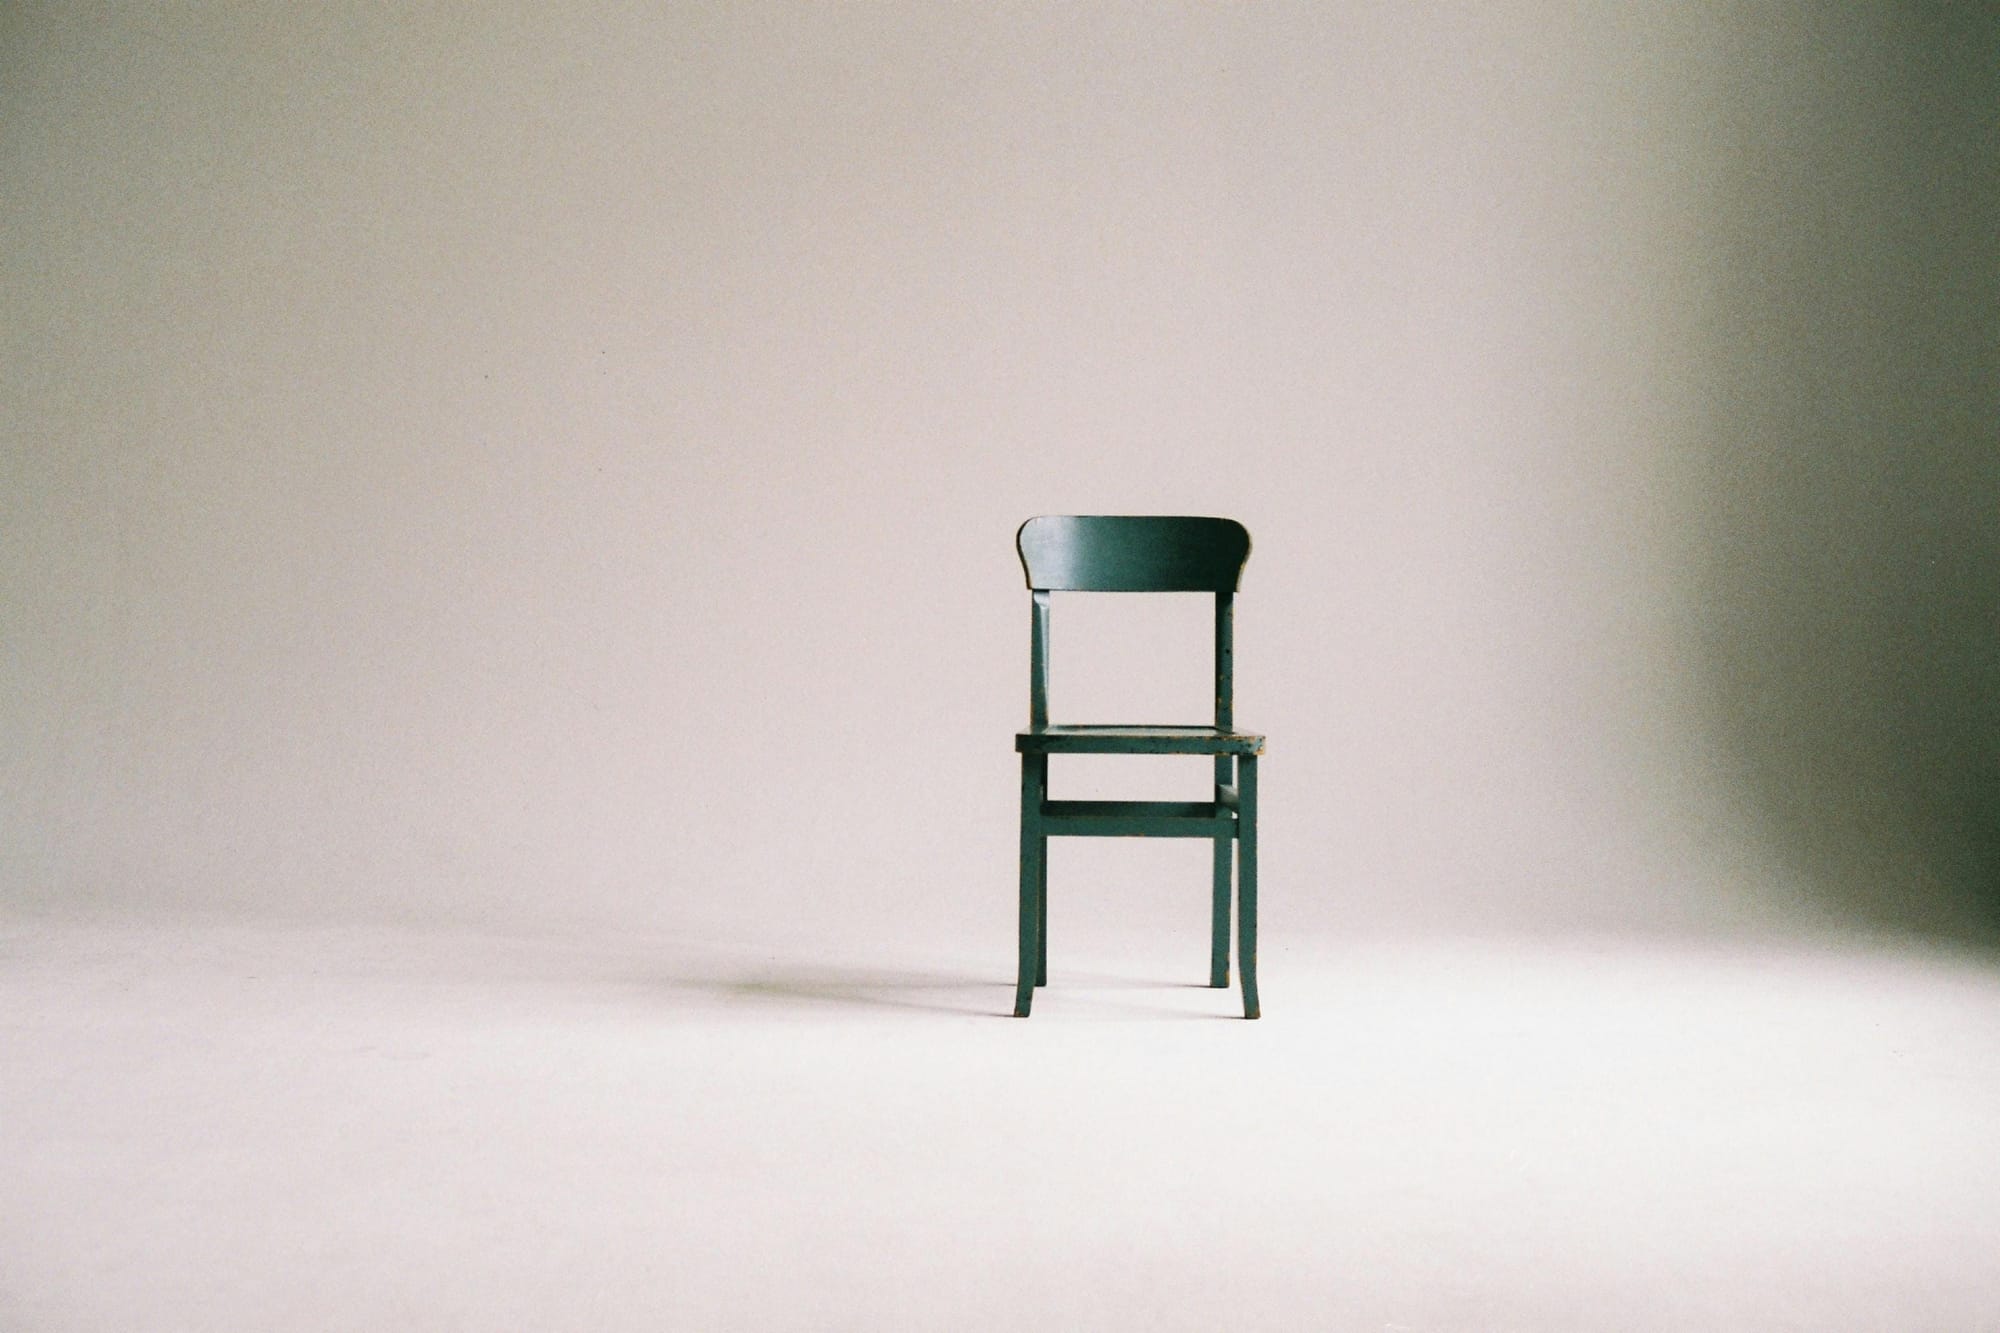 A simple black wood chair sits in an empty white room